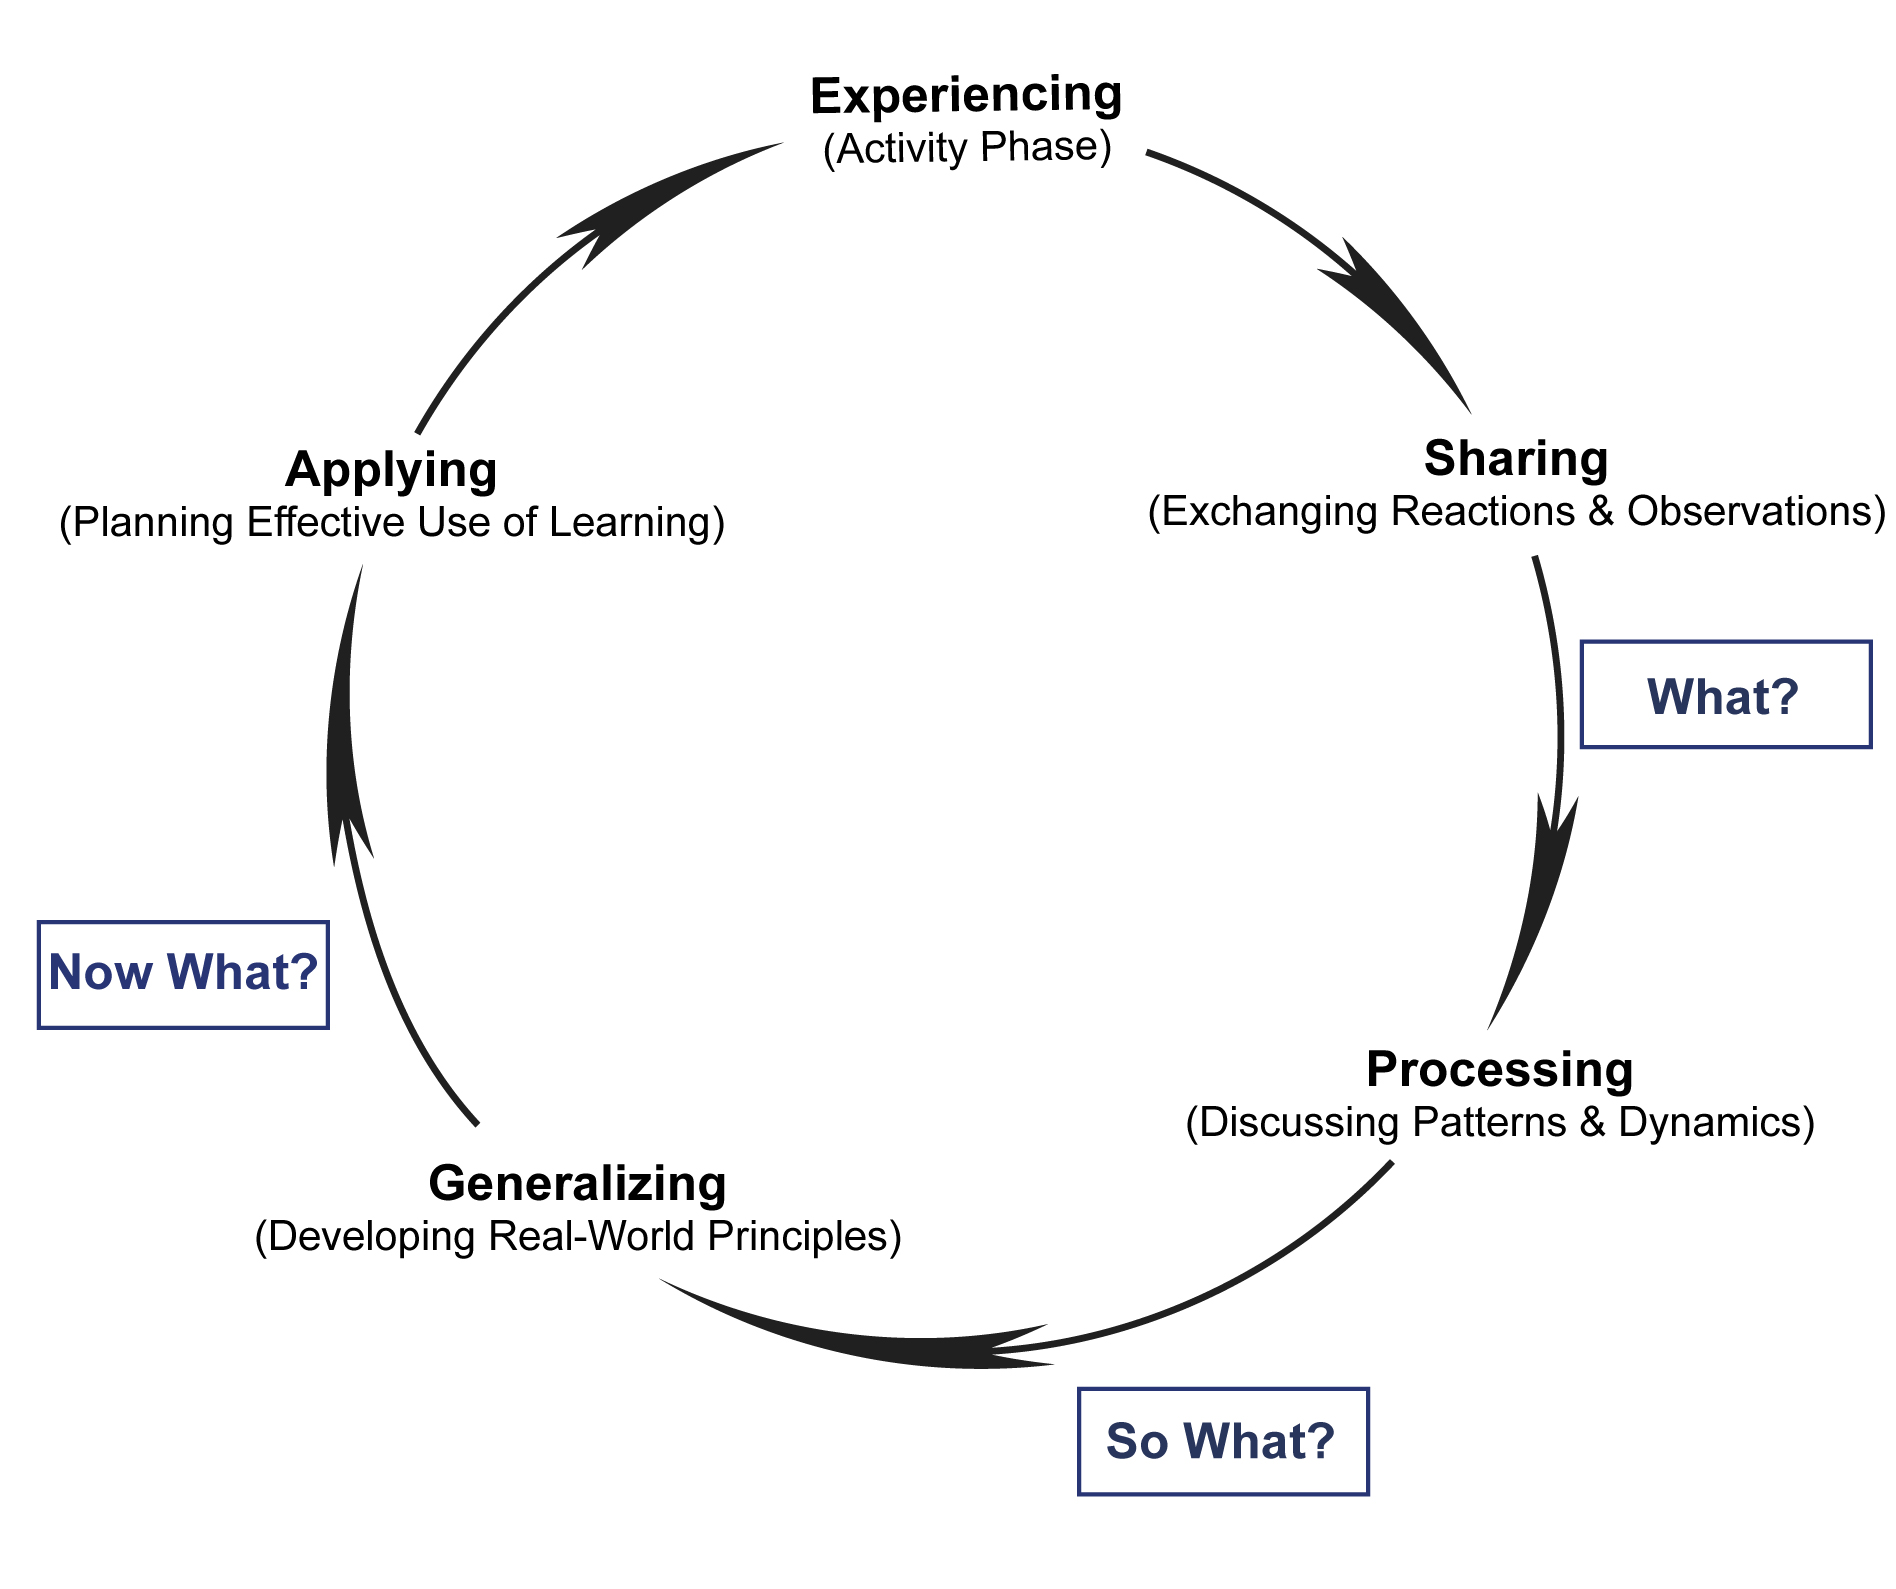 action learning cycle